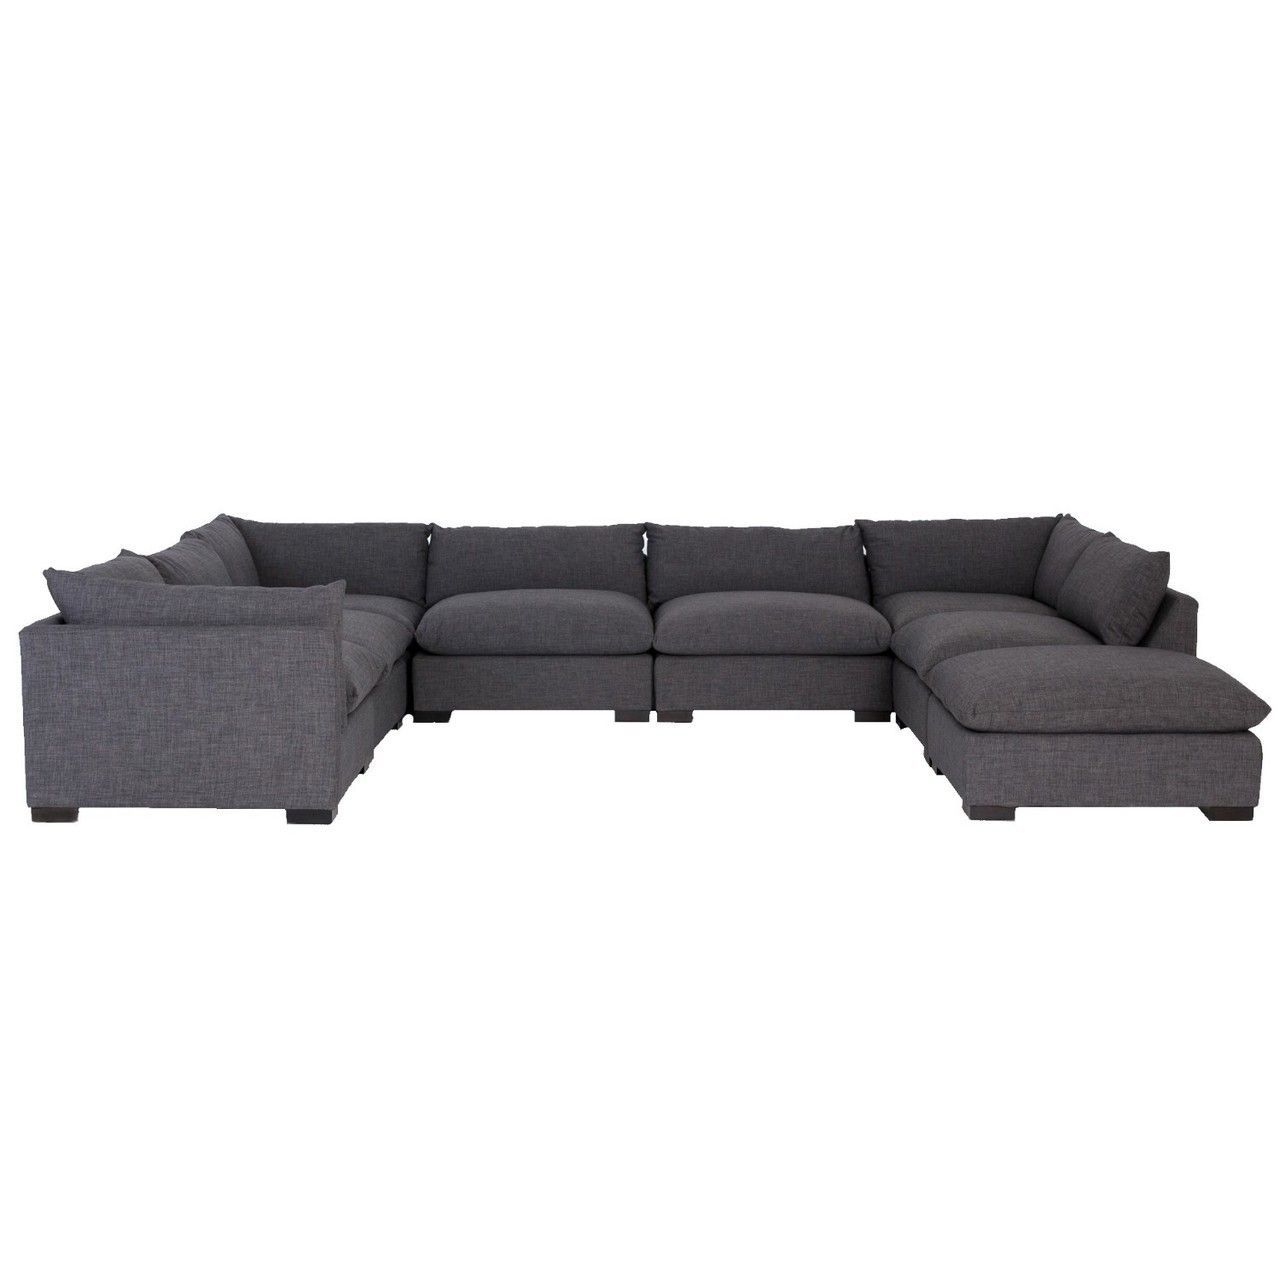 Westworld Modern Gray 8 Piece U Shape Sectional Sofa 156" | Sectional Pertaining To Modern U Shape Sectional Sofas In Gray (View 5 of 20)